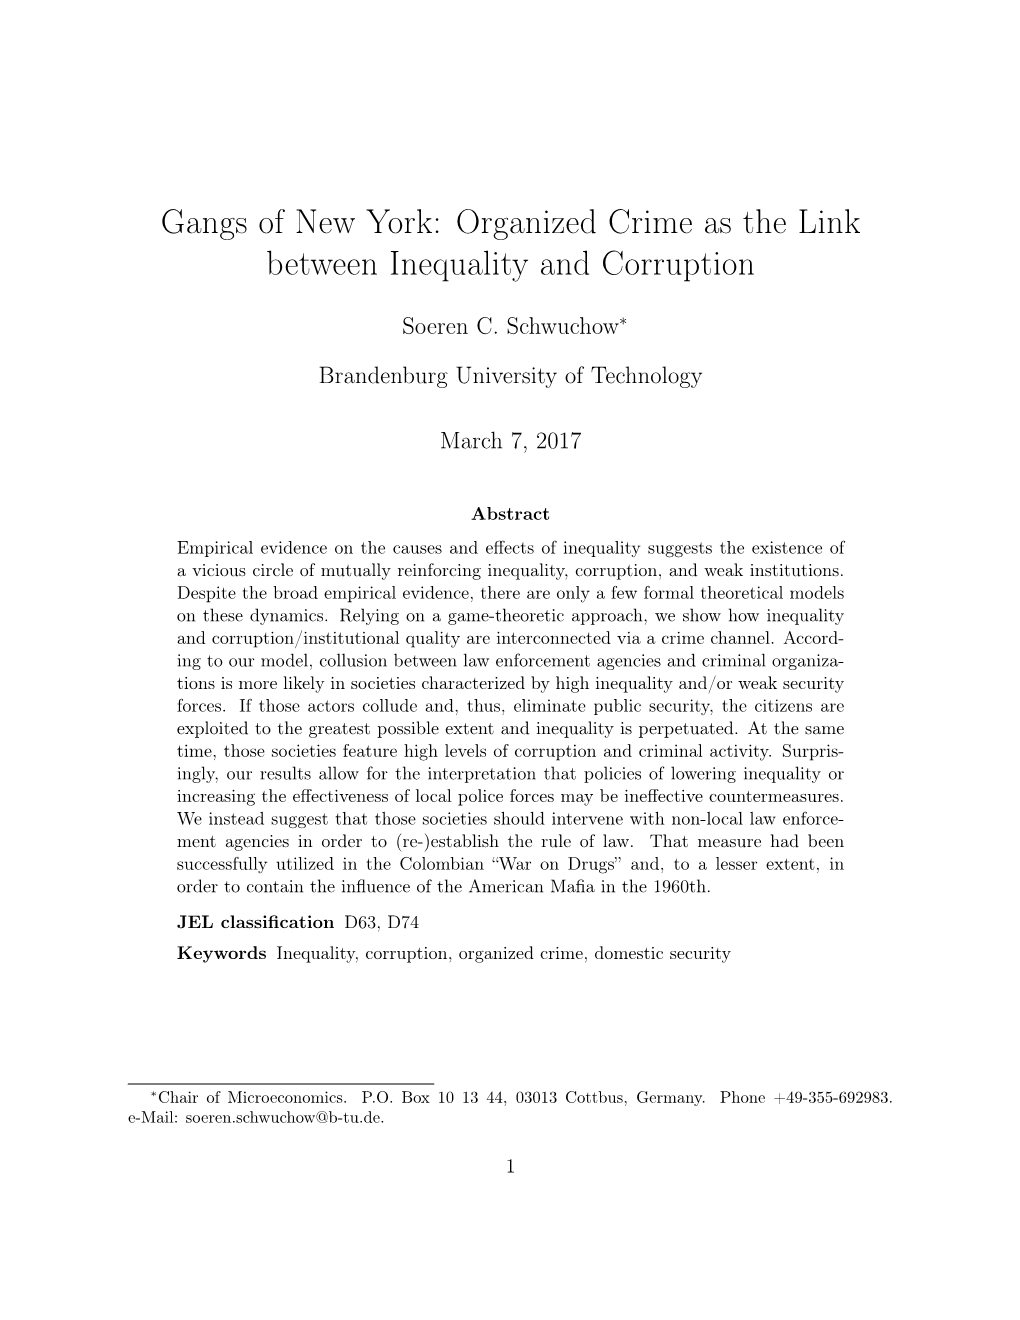 Organized Crime As the Link Between Inequality and Corruption